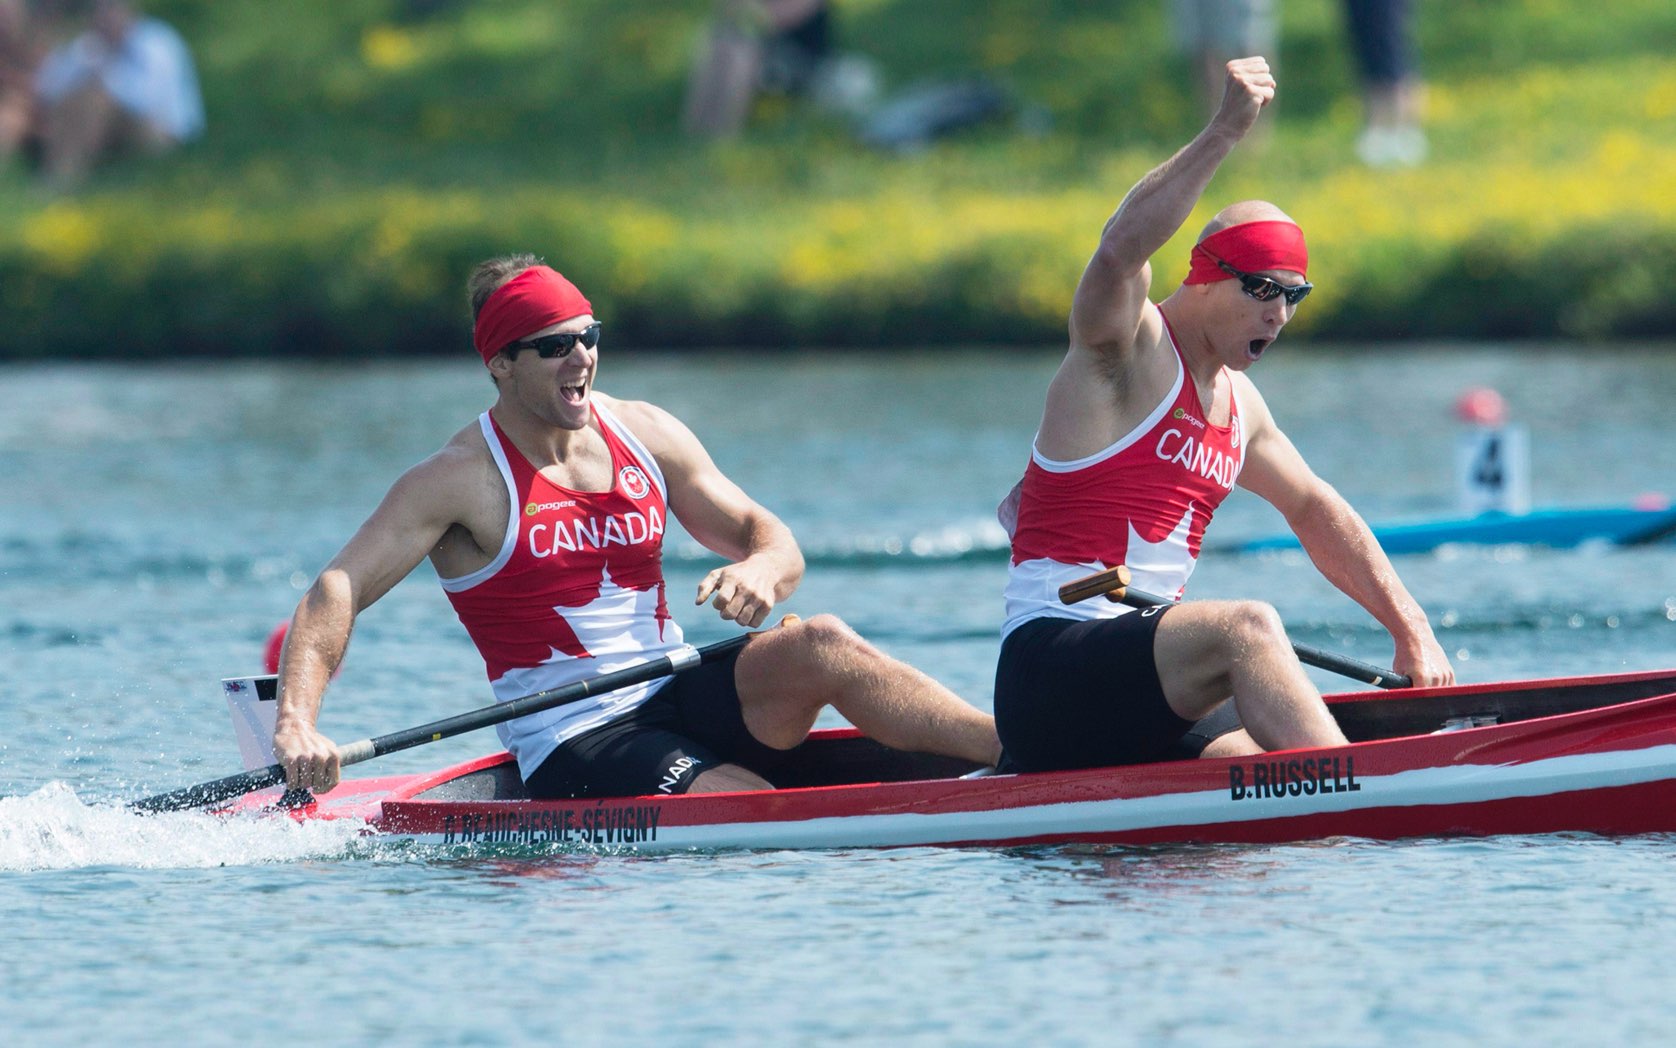 Gabriel Beauchesne-Sévigny and Ben Russell celebrating in their canoe